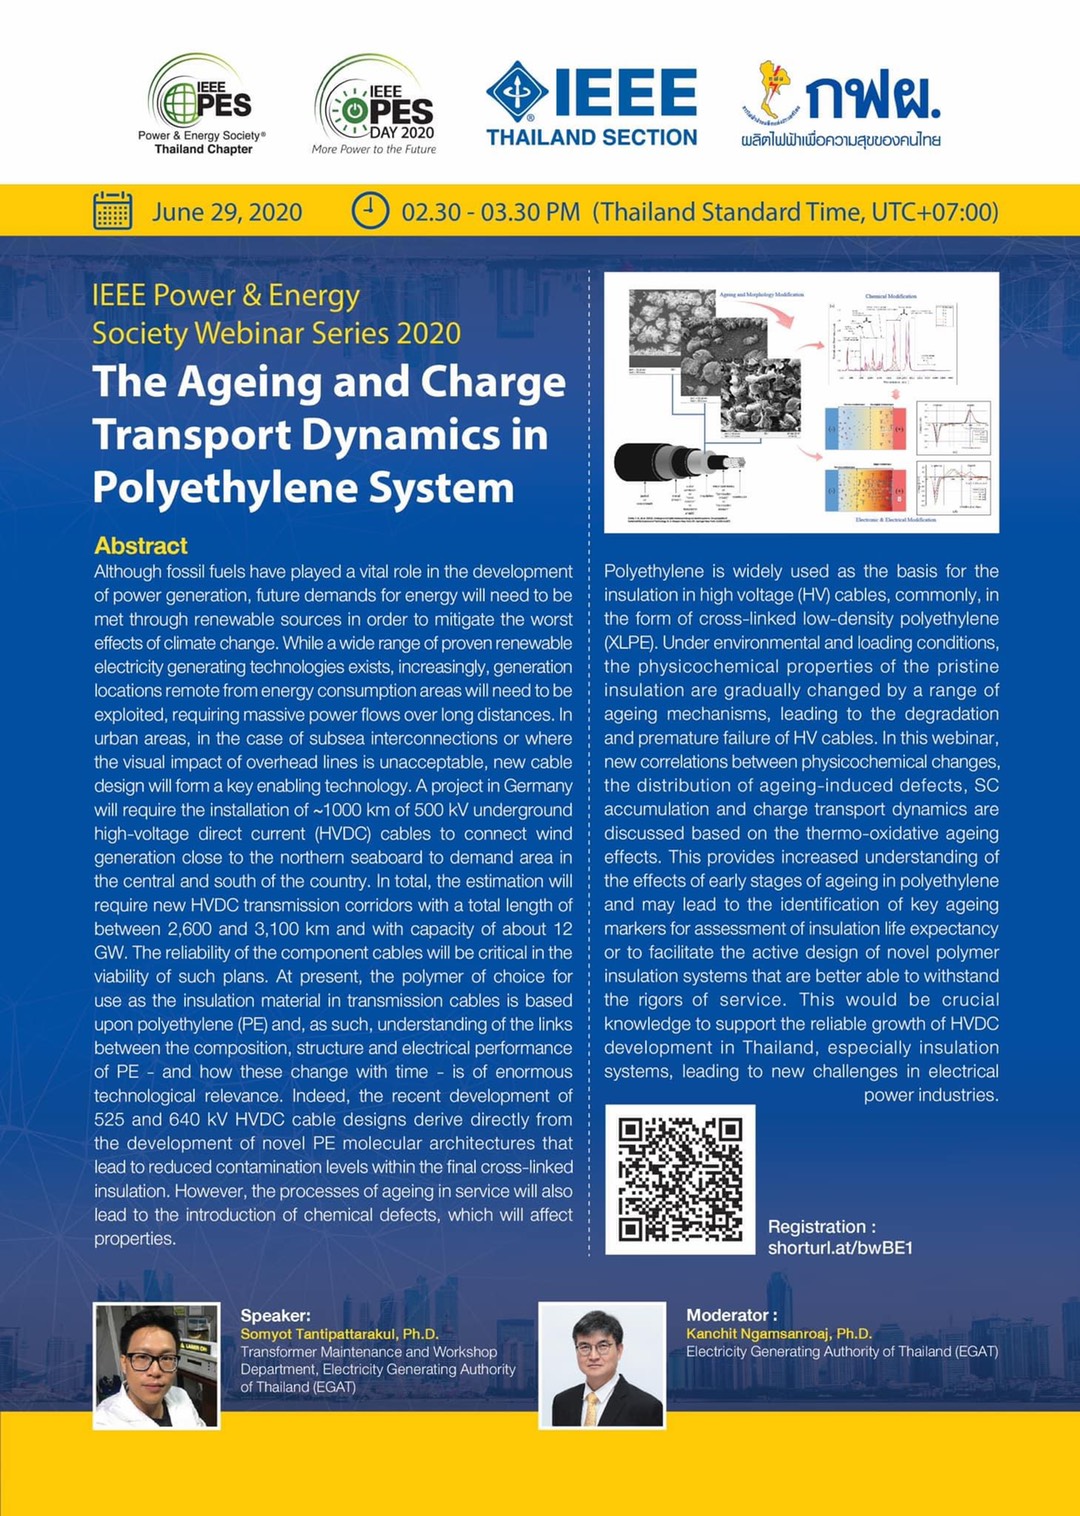 IEEE Thailand PES Chapter Webinar on The Ageing and Charge Transport Dynamics in Polyethylene System